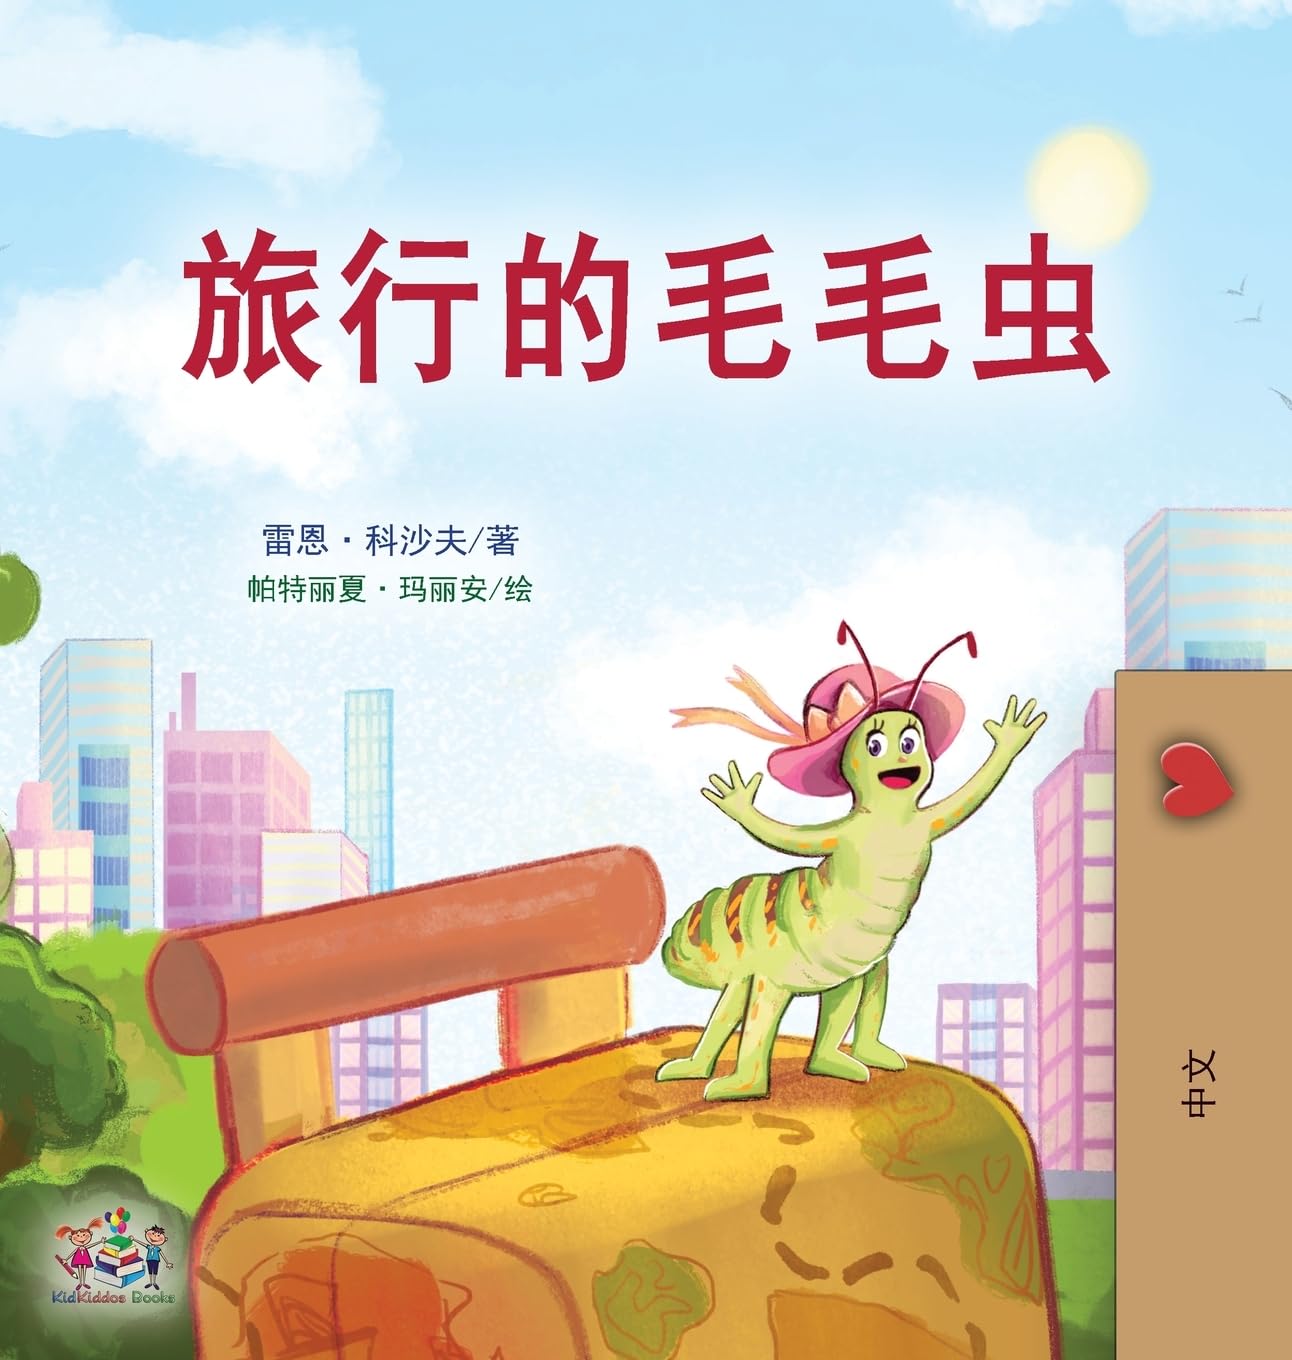 The Traveling Caterpillar (Chinese Book for Kids) (Chinese Bedtime Collection) (Chinese Edition)